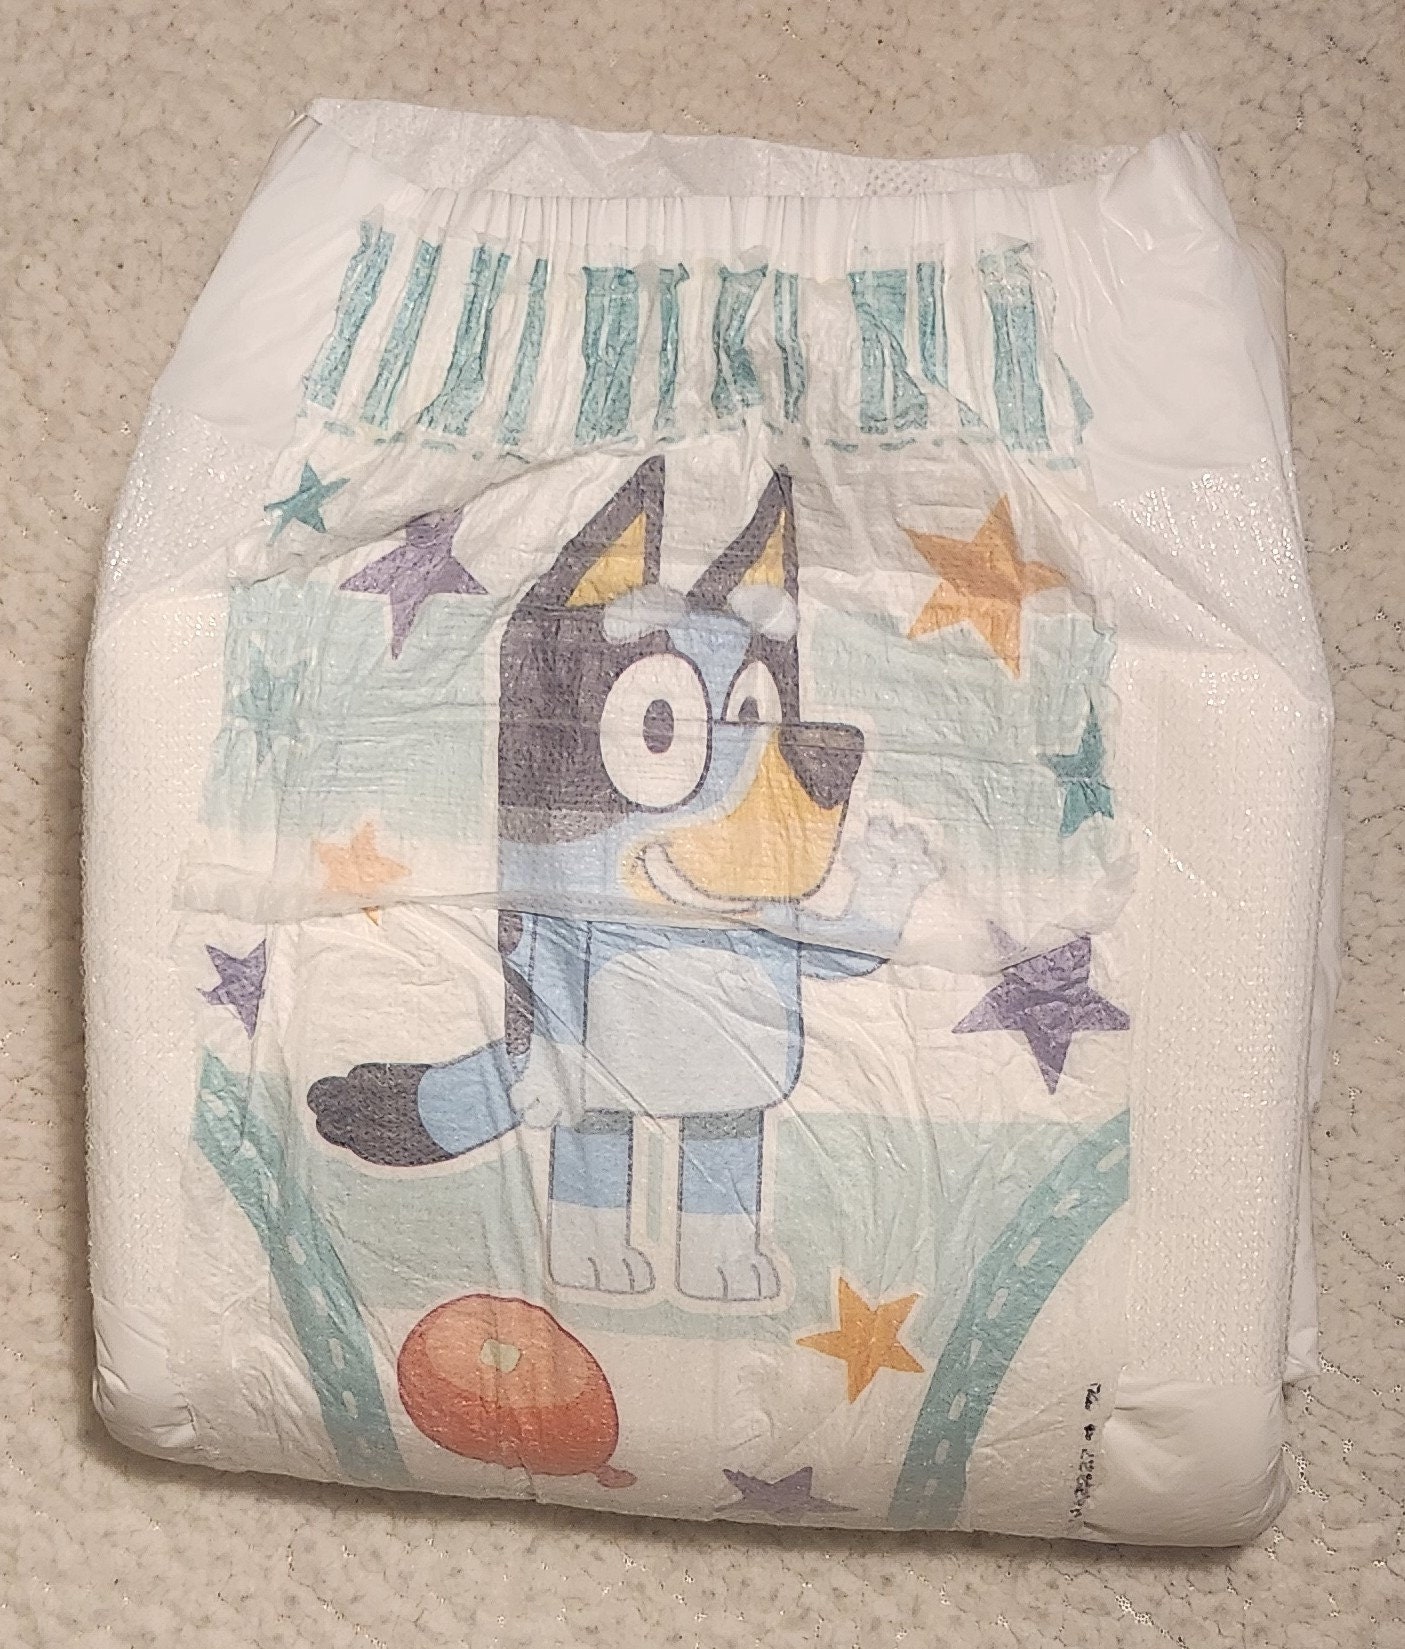 X 上的 Pull-Ups Power：「#GoodNites [February 2018] #ABDL #Diaper #Diapers  #Pañal #Couches #RestEasyTonight #ConquerBedWetting   / X